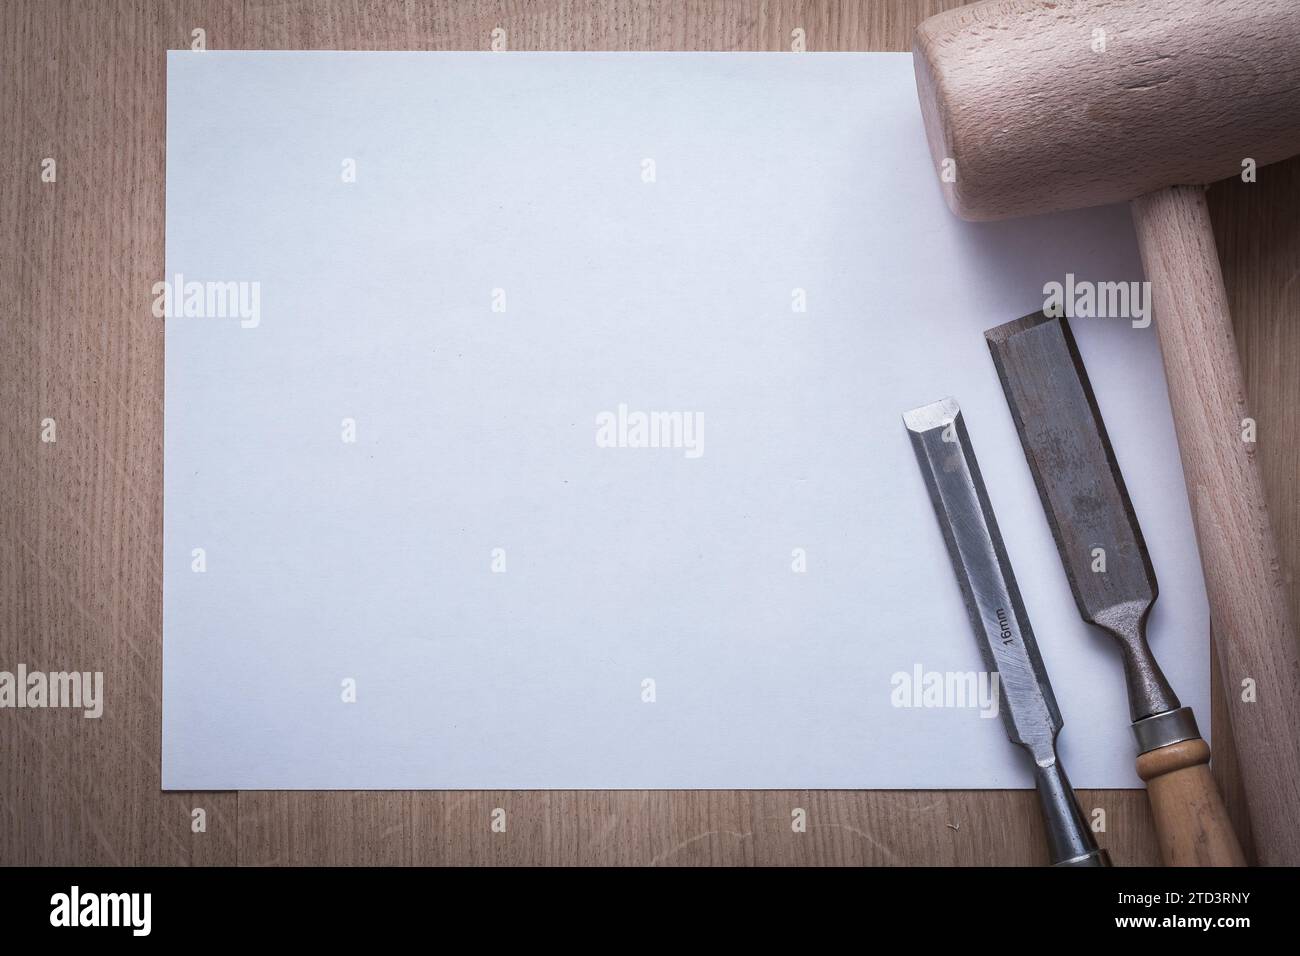 Firmer chisels lump hammer and clean sheet of paper on wooden board copy space construction concept Stock Photo